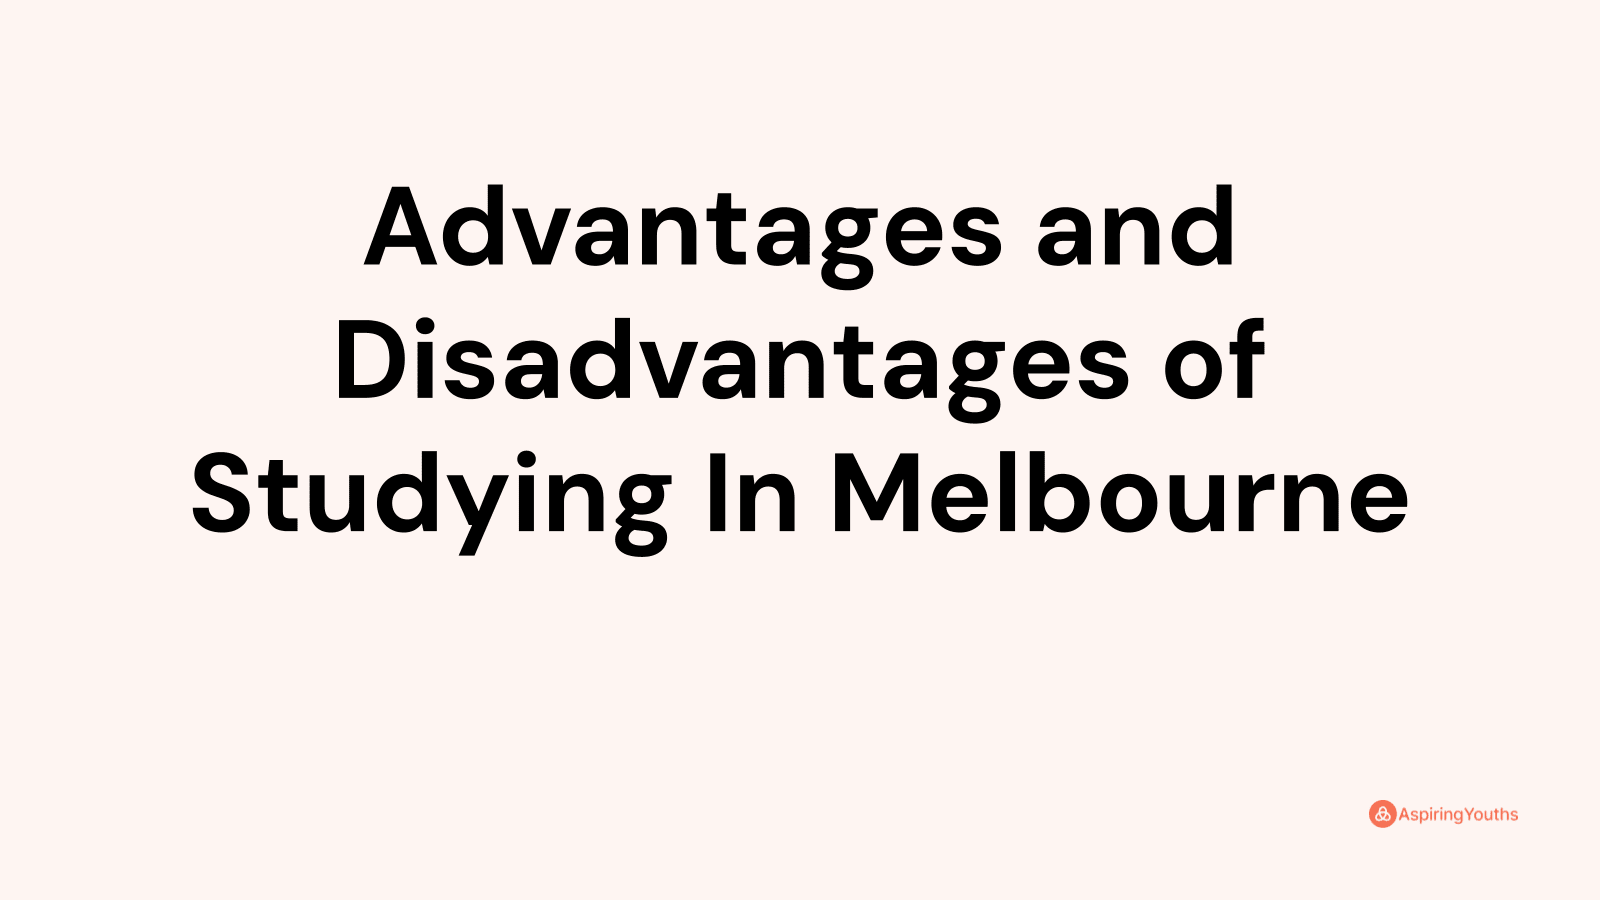 Advantages and disadvantages of Studying In Melbourne